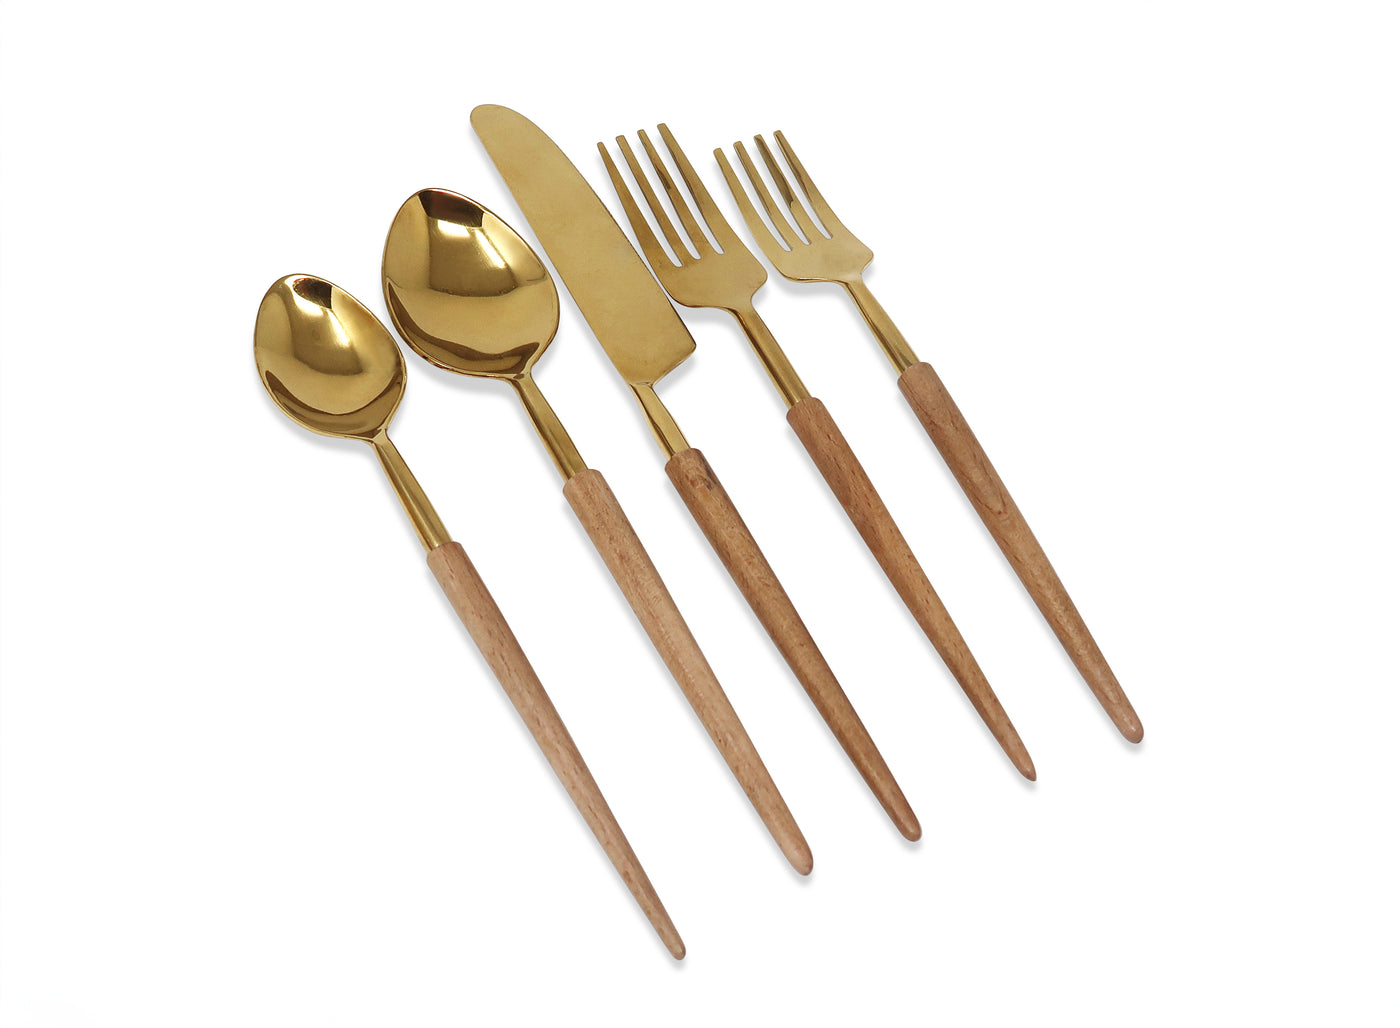 20 Pc Flatware Set with Wooden Pointy Handles - Service for 4 - Hand Wash